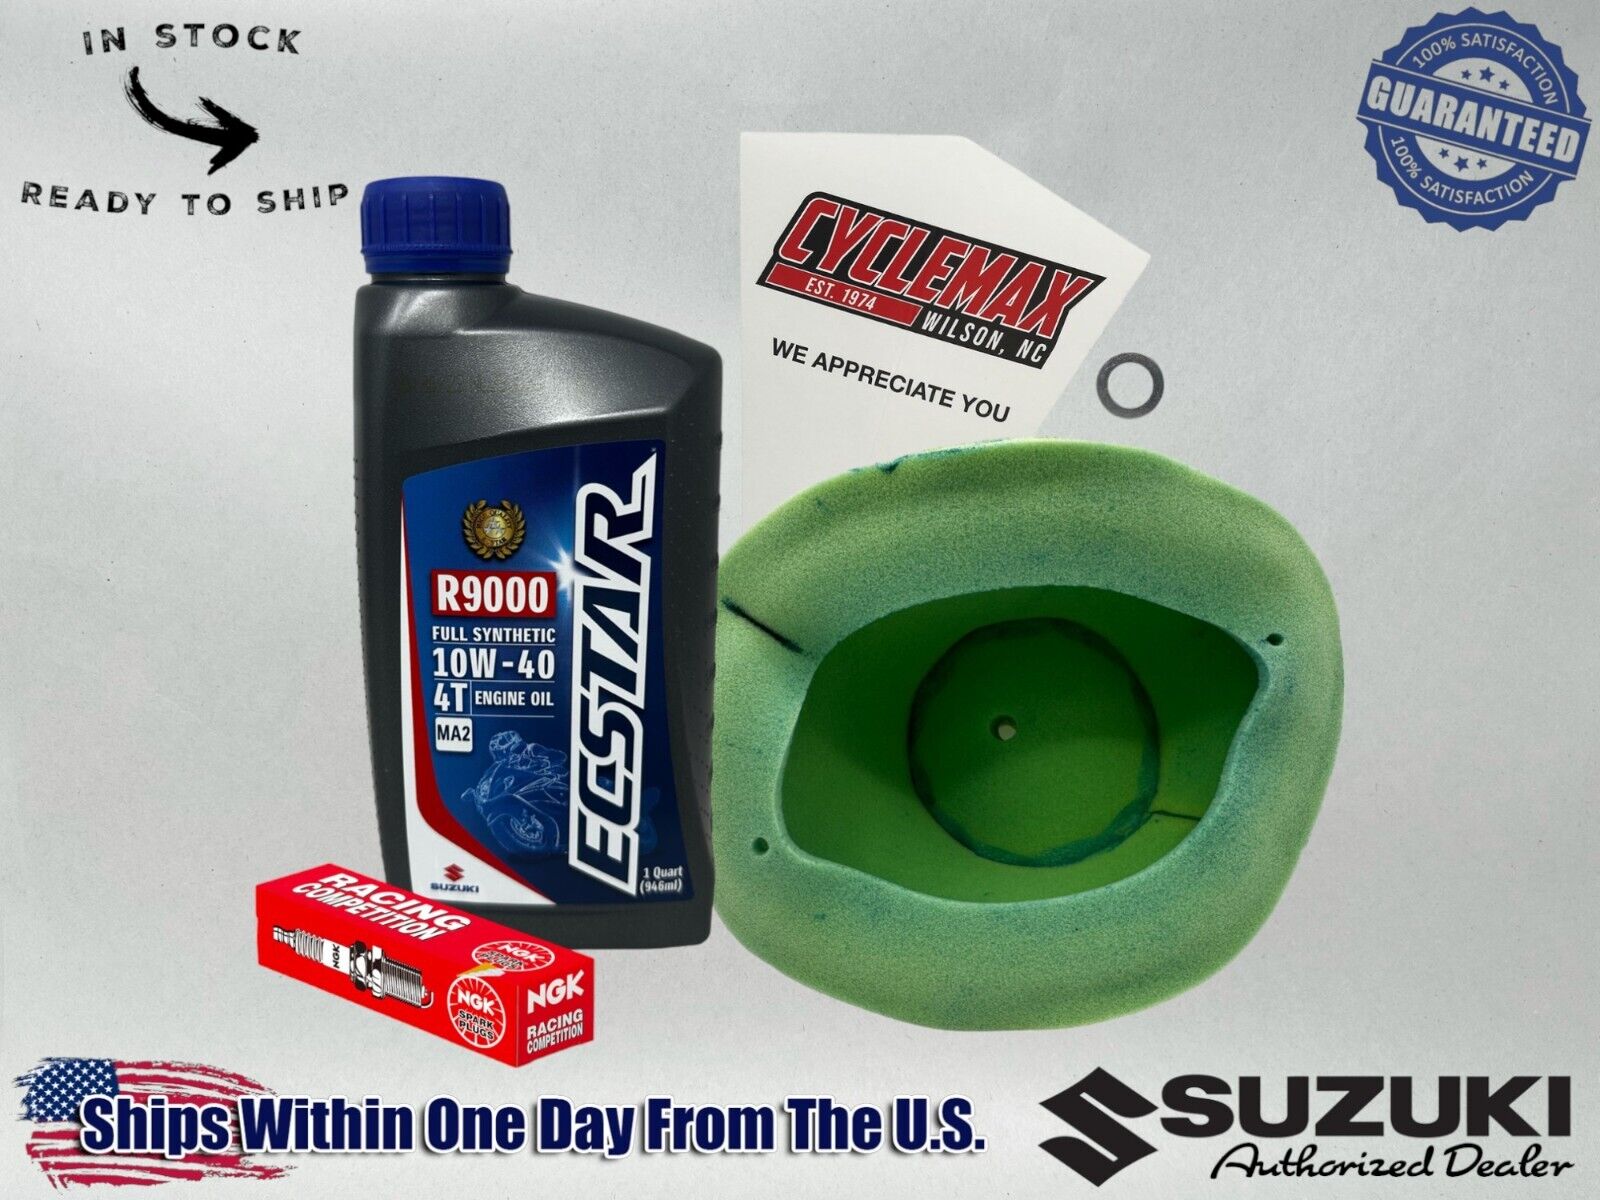 Cyclemax FS 10W-40 R9000 Transmission Oil Tune-Up Kit for 1996-2000 Suzuki RM125